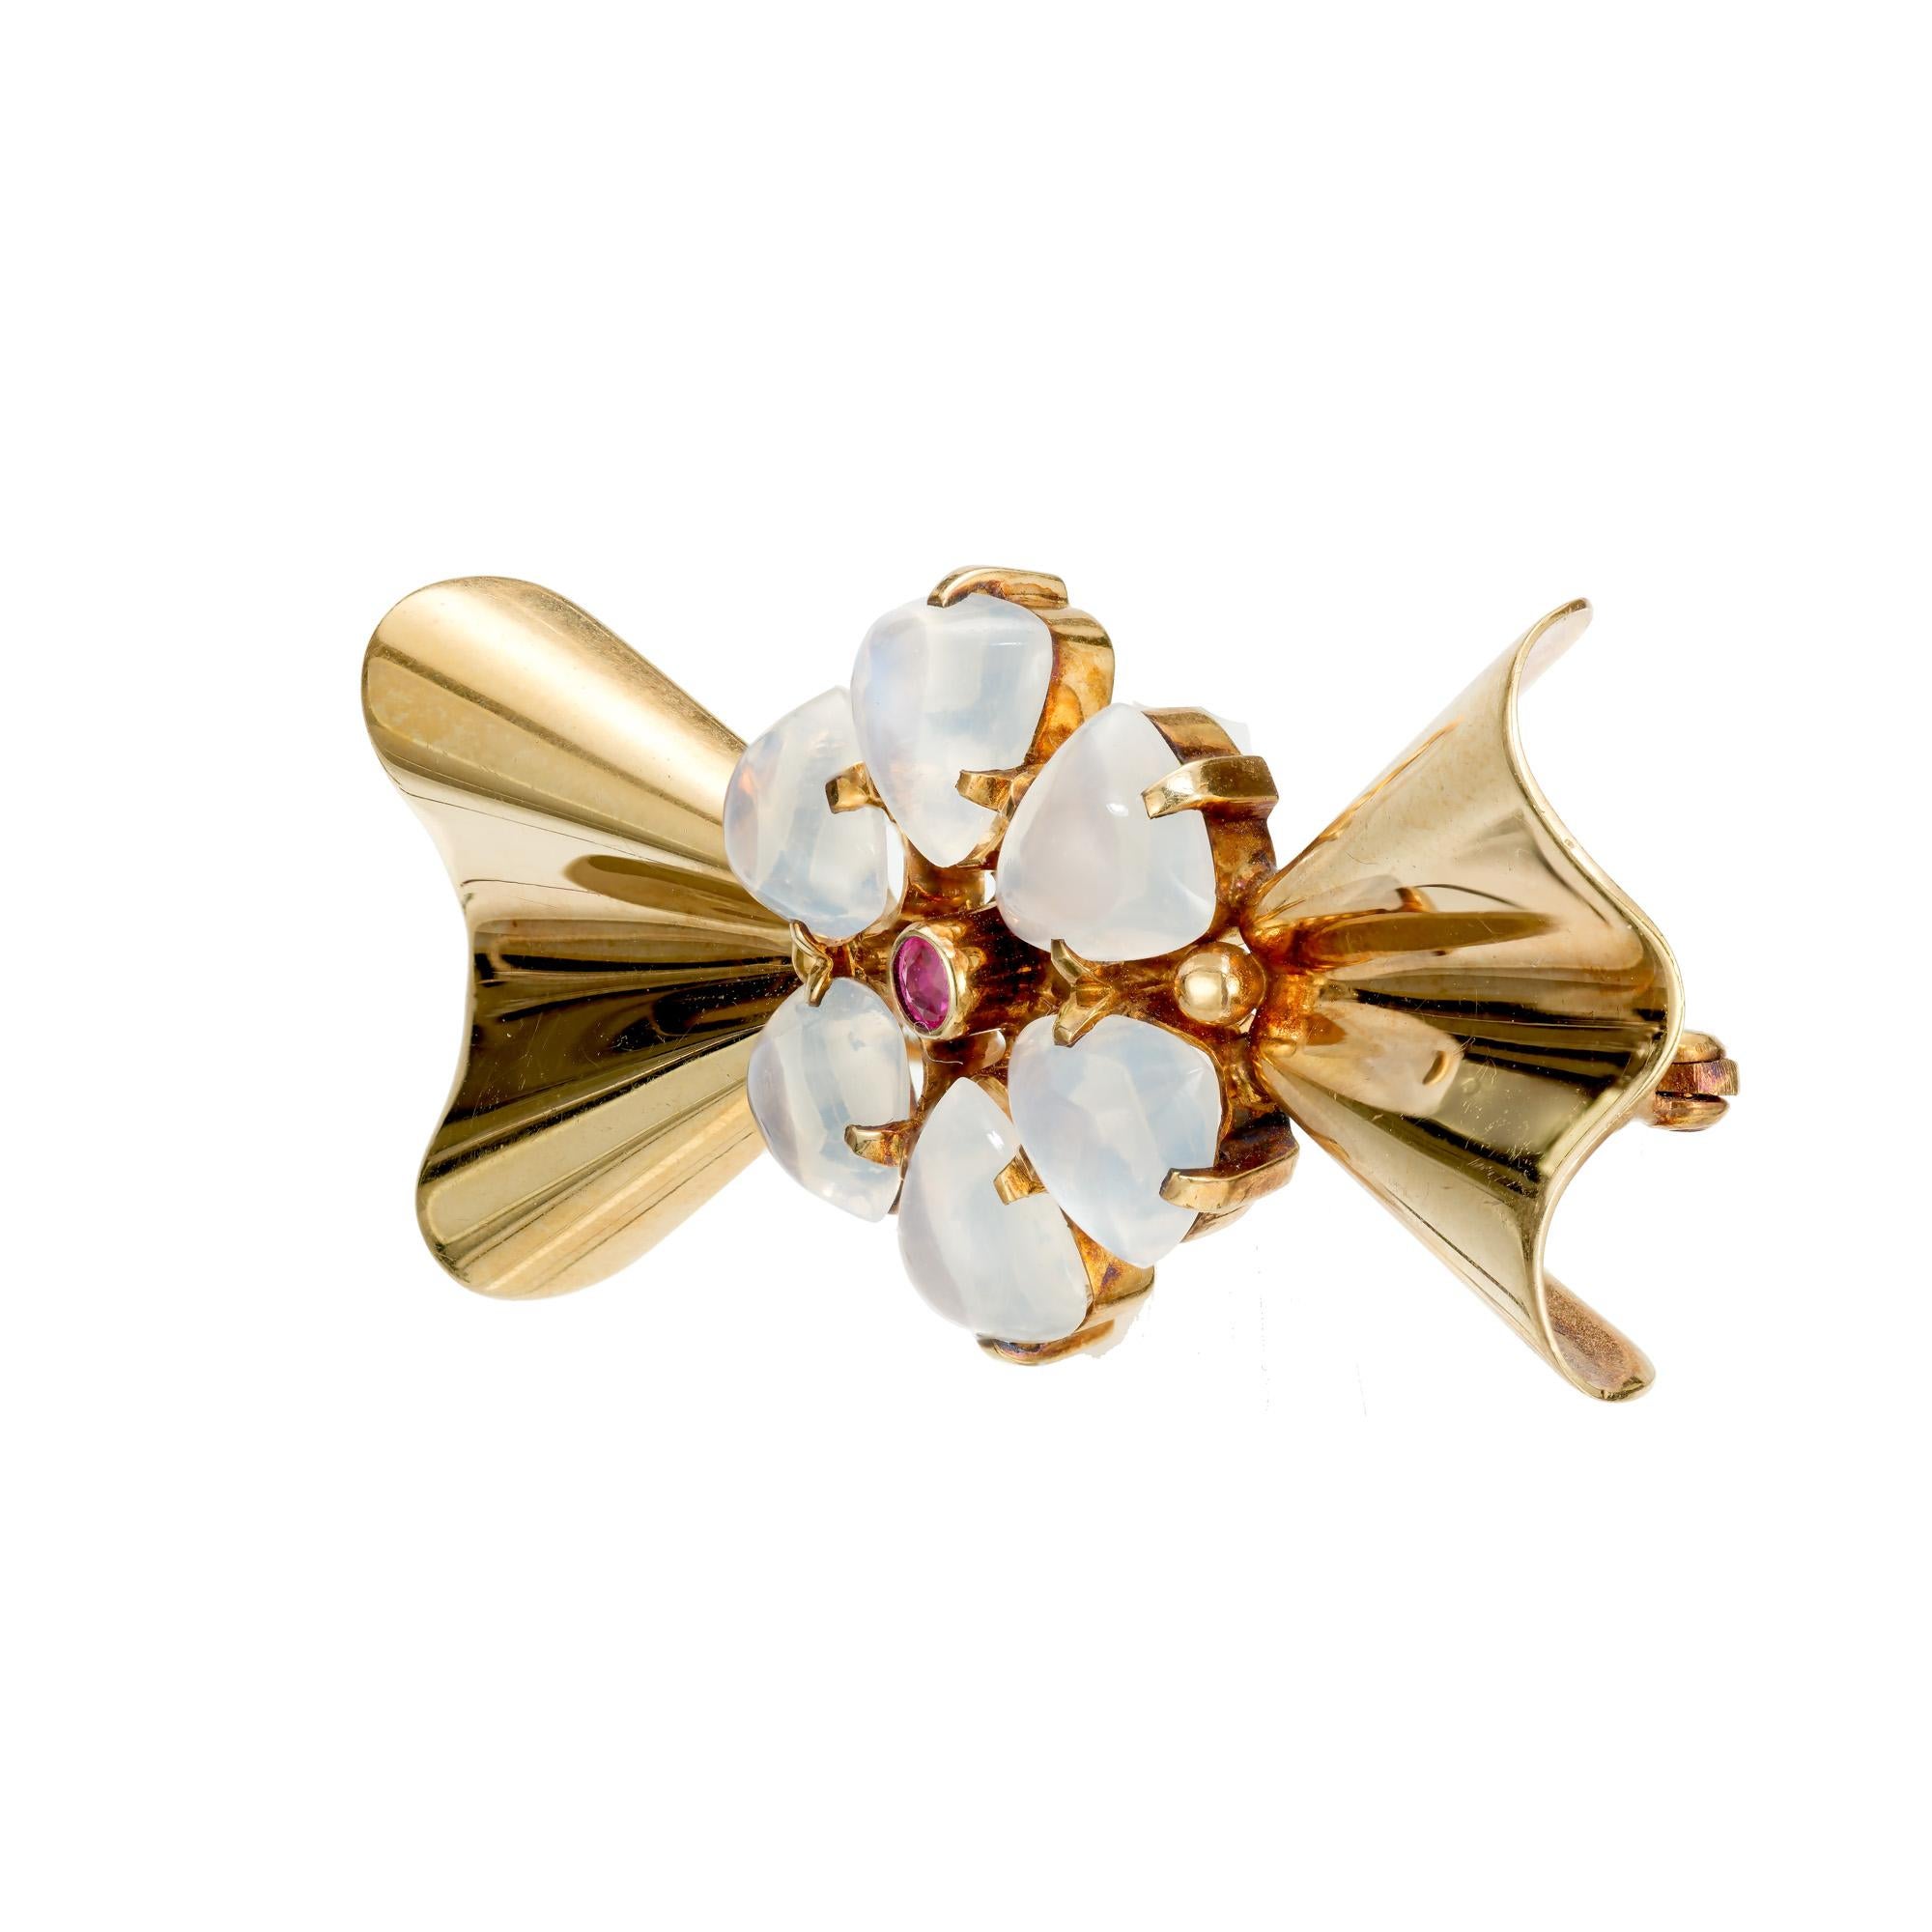 Tiffany & Co moonstone and ruby brooch. 6 fancy cut moonstones with 1 round ruby center stone, set in a 14k yellow gold brooch.  Classic example of the art of Tiffany in the late 30’s and early 40’s. Circa 1935-1945.

6 fancy cut moonstones with